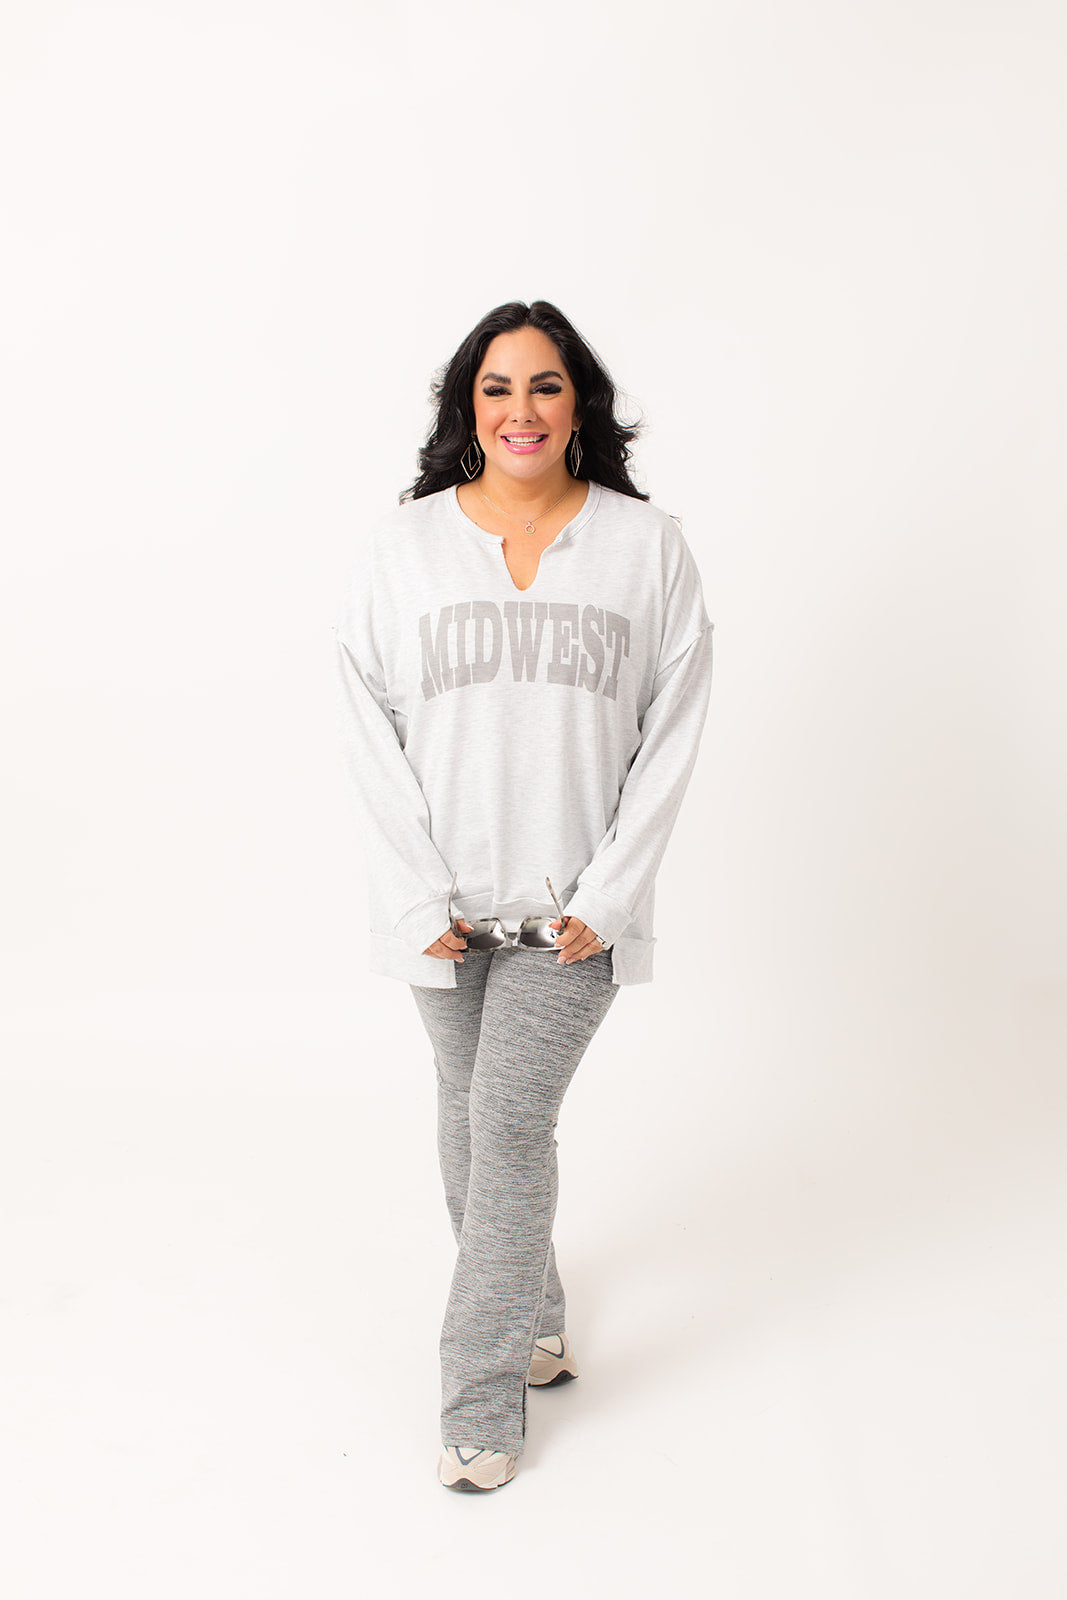 This light grey sweatshirt features an oversized, loose fit for maximum comfort and a contrast stitch design for added style. The notch neck adds a unique touch, while the Western graphic adds a touch of personality. Stay cozy and fashionable with the Midwest Graphic Light Sweater.